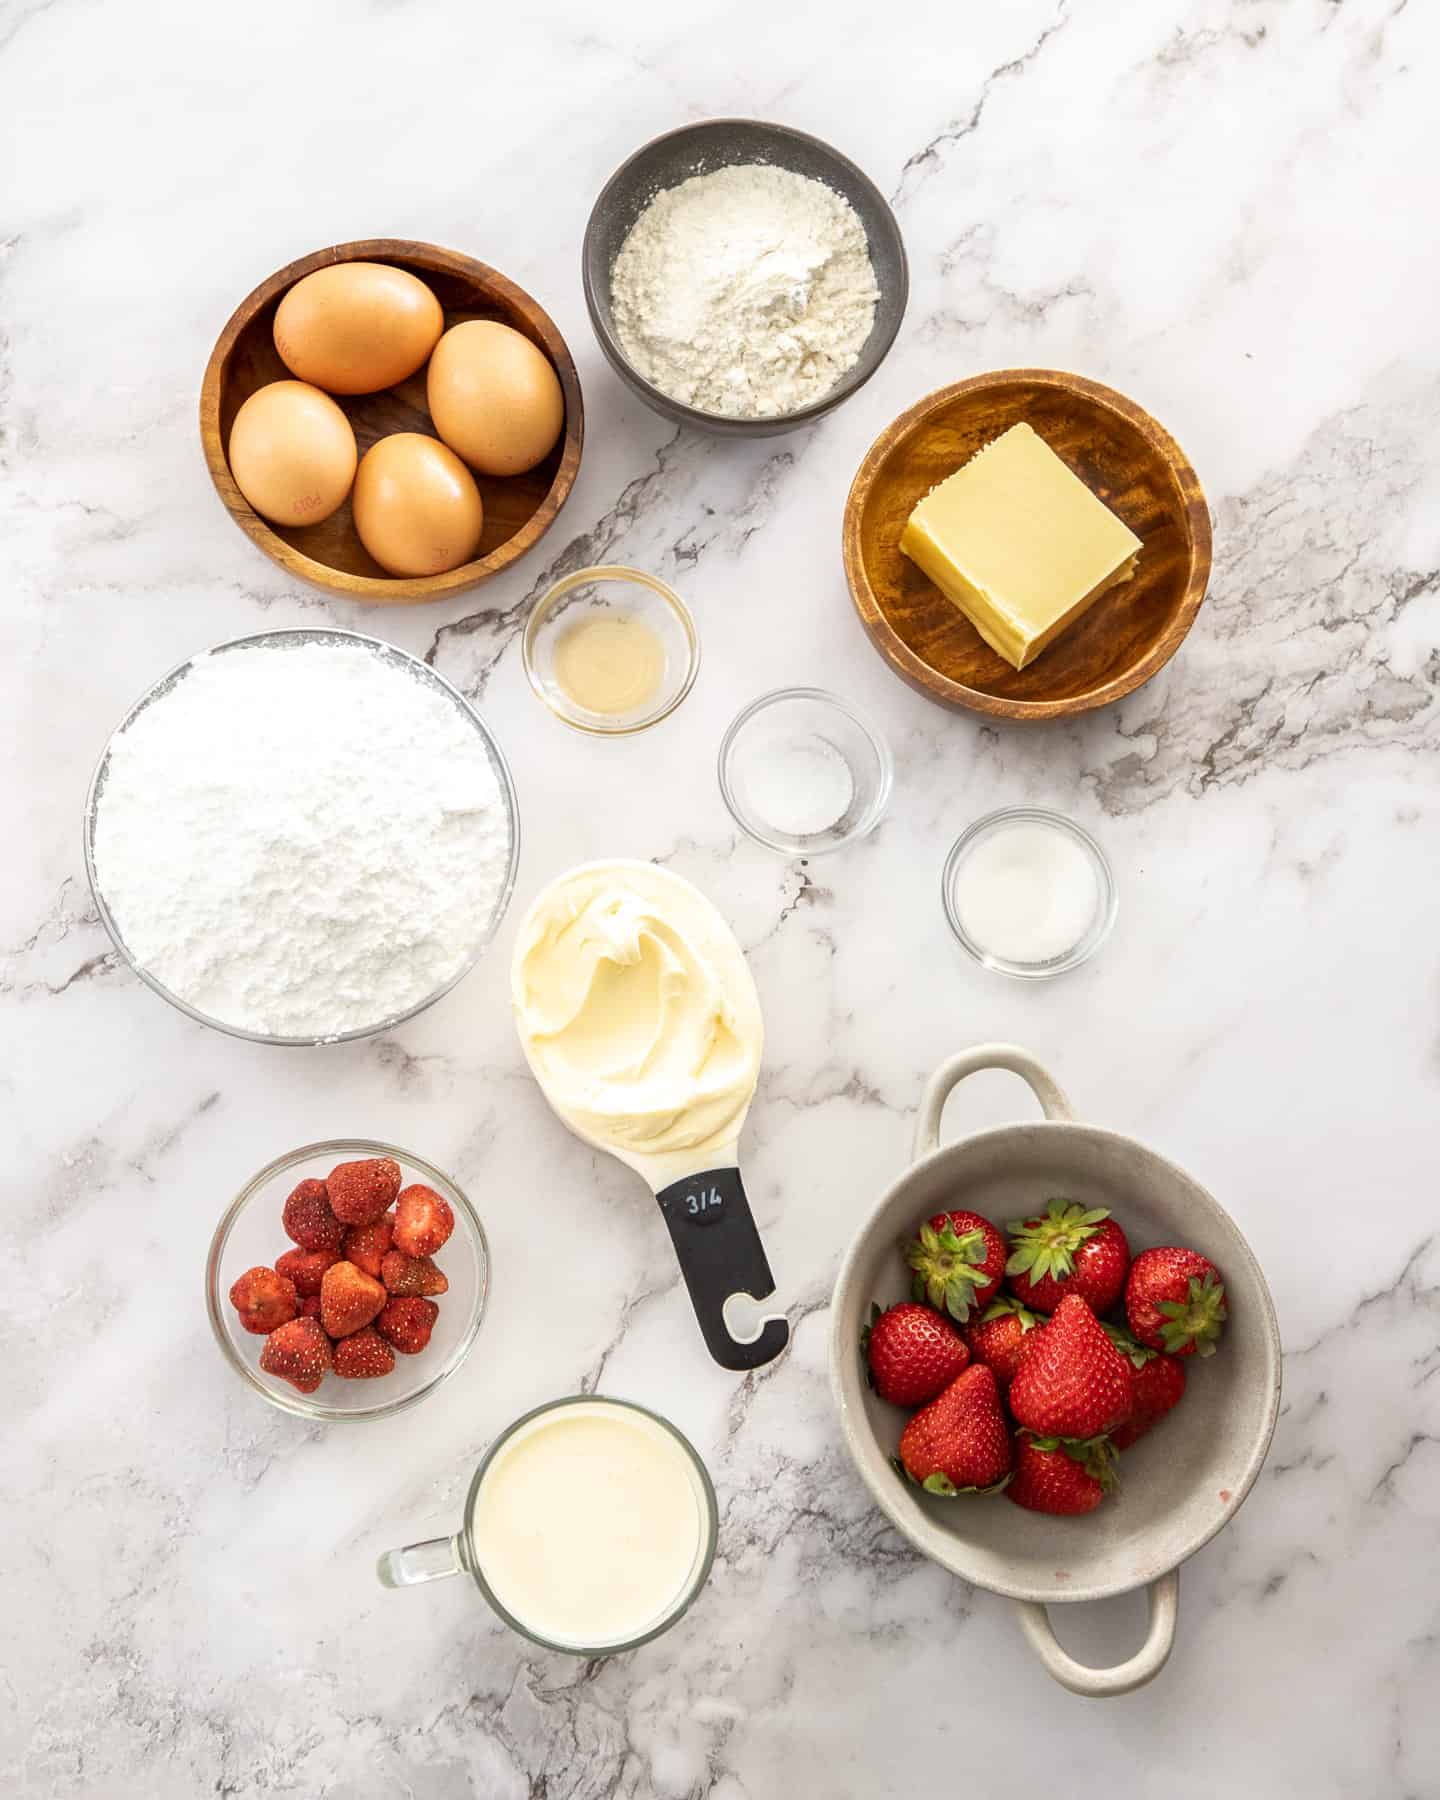 Ingredients for strawberry cream puffs on a marble benchtop.